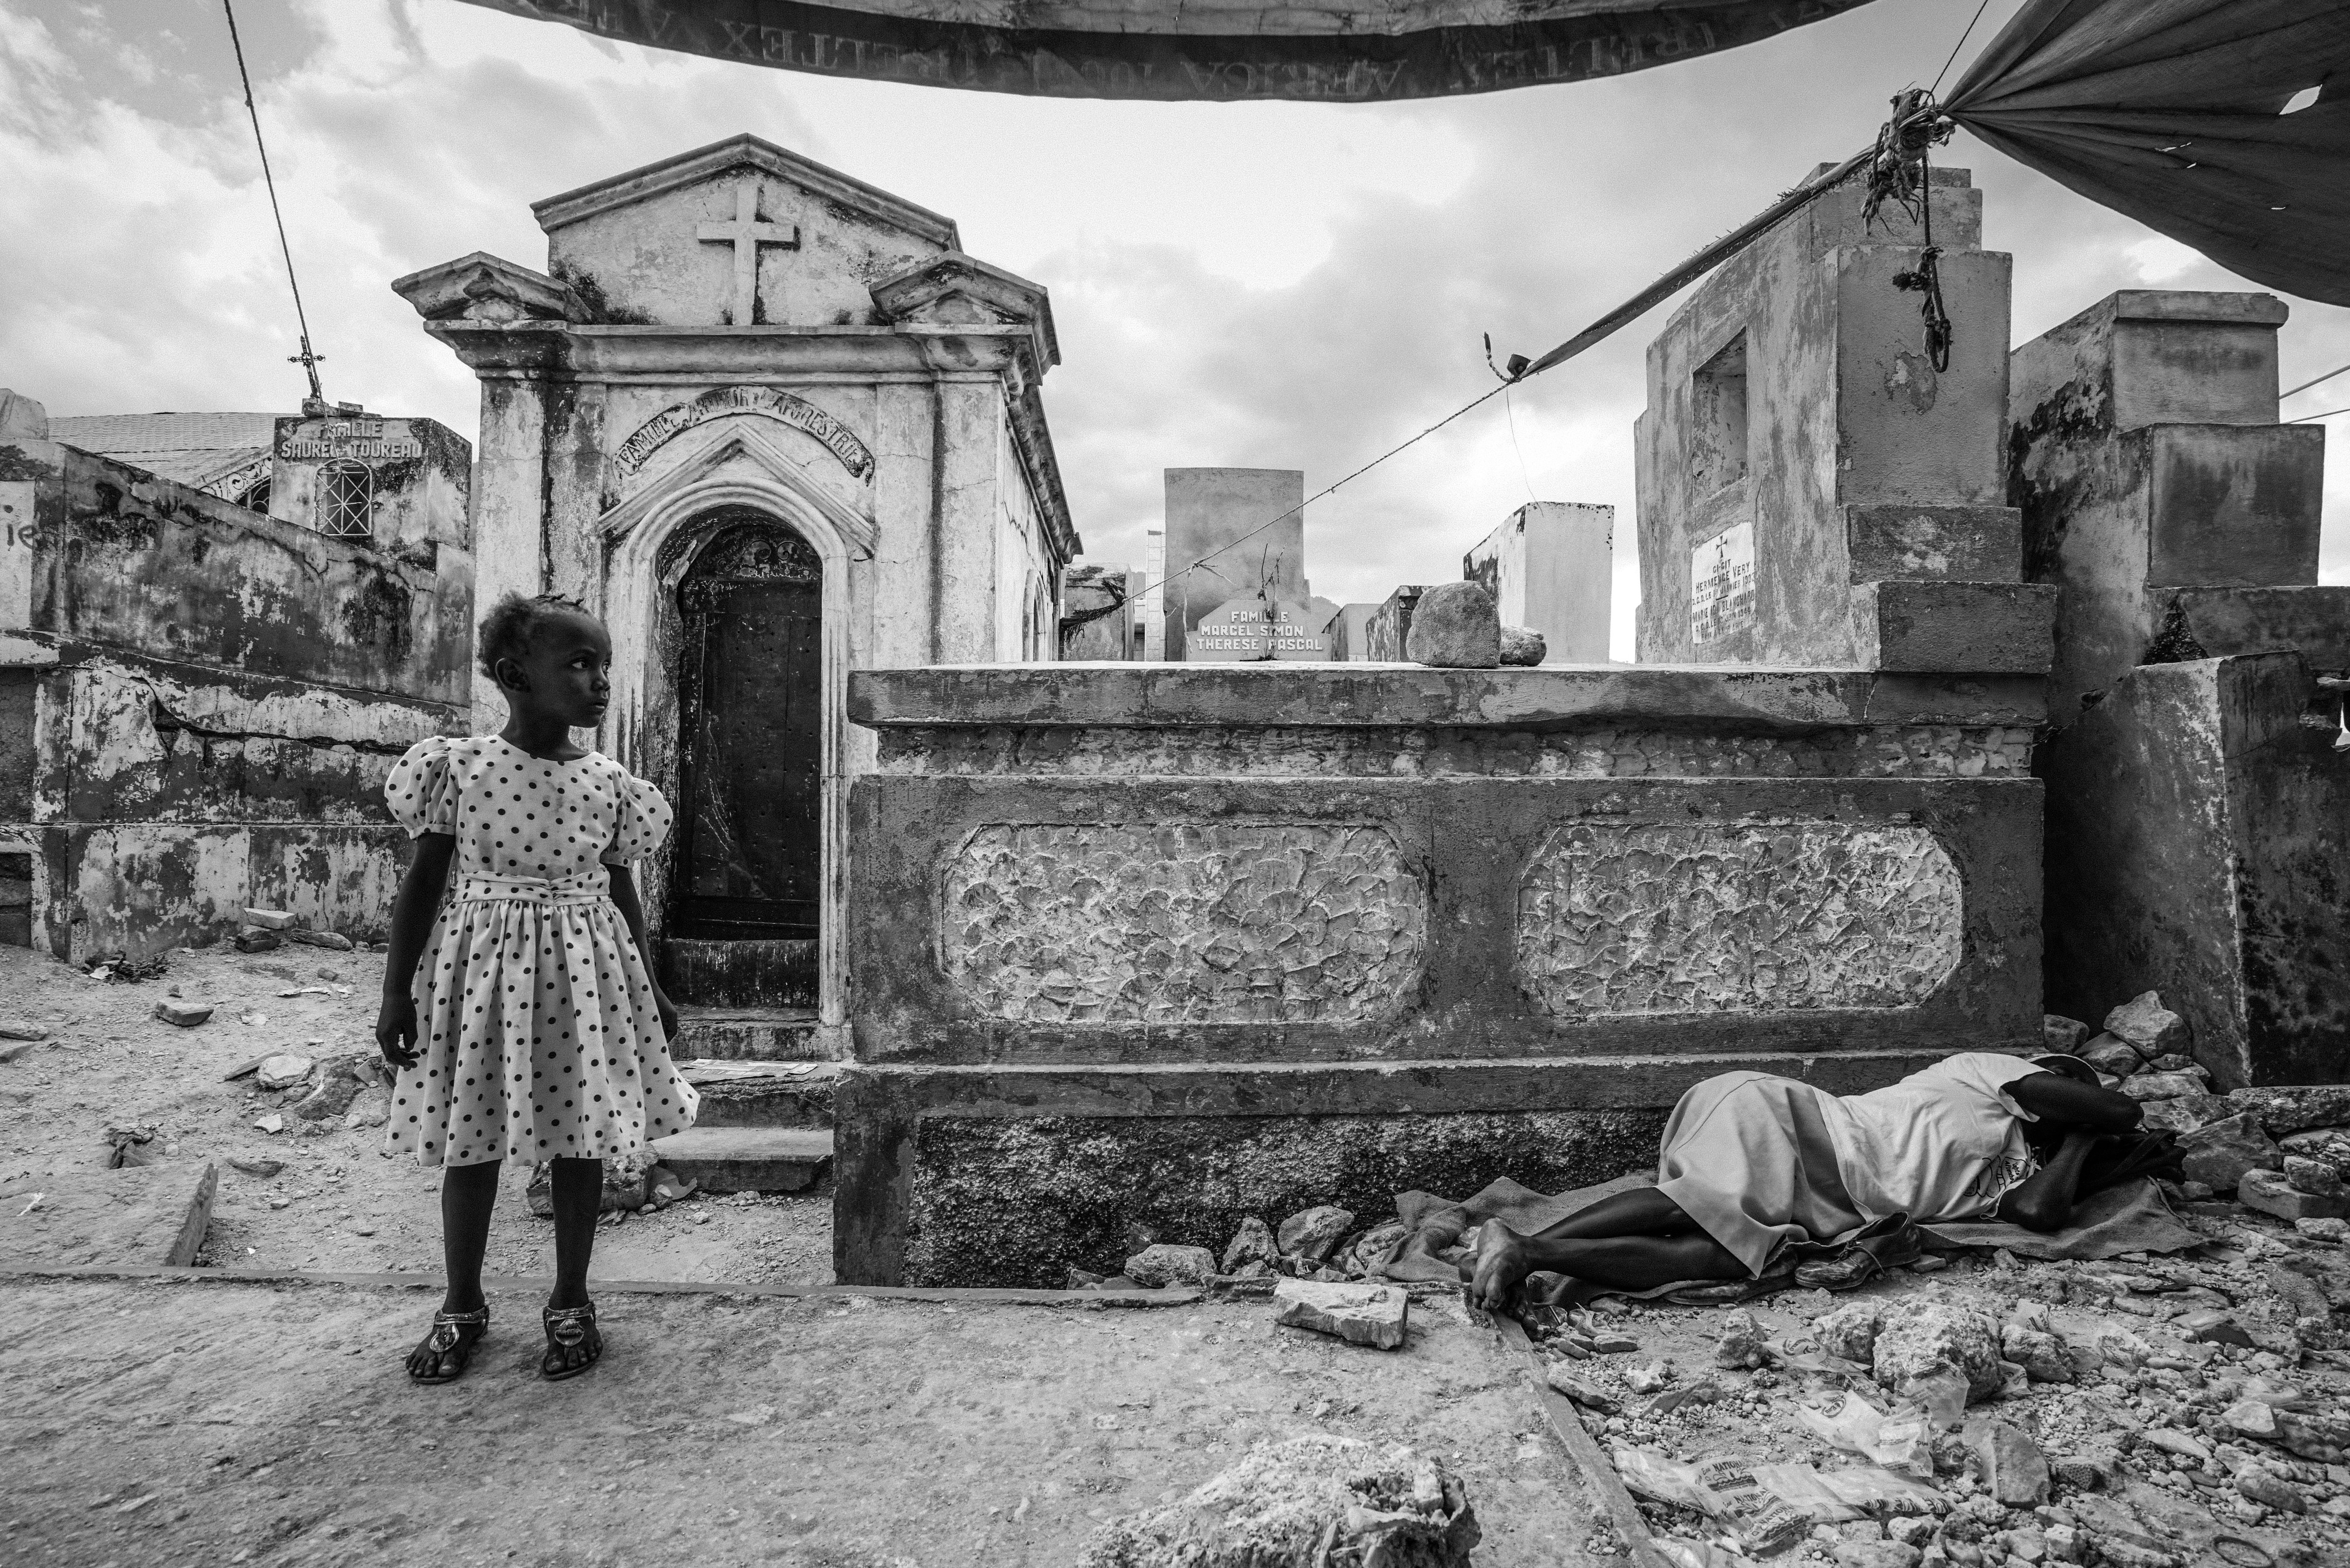 On the fifth anniversary of the devastating earthquake, a young child stands to the side of her mourning mother who lies weeping nearby in the Grand Cemetery of Port-Au-Prince, Haiti, Jan. 12, 2015. (Giles Clarke—Getty Images)